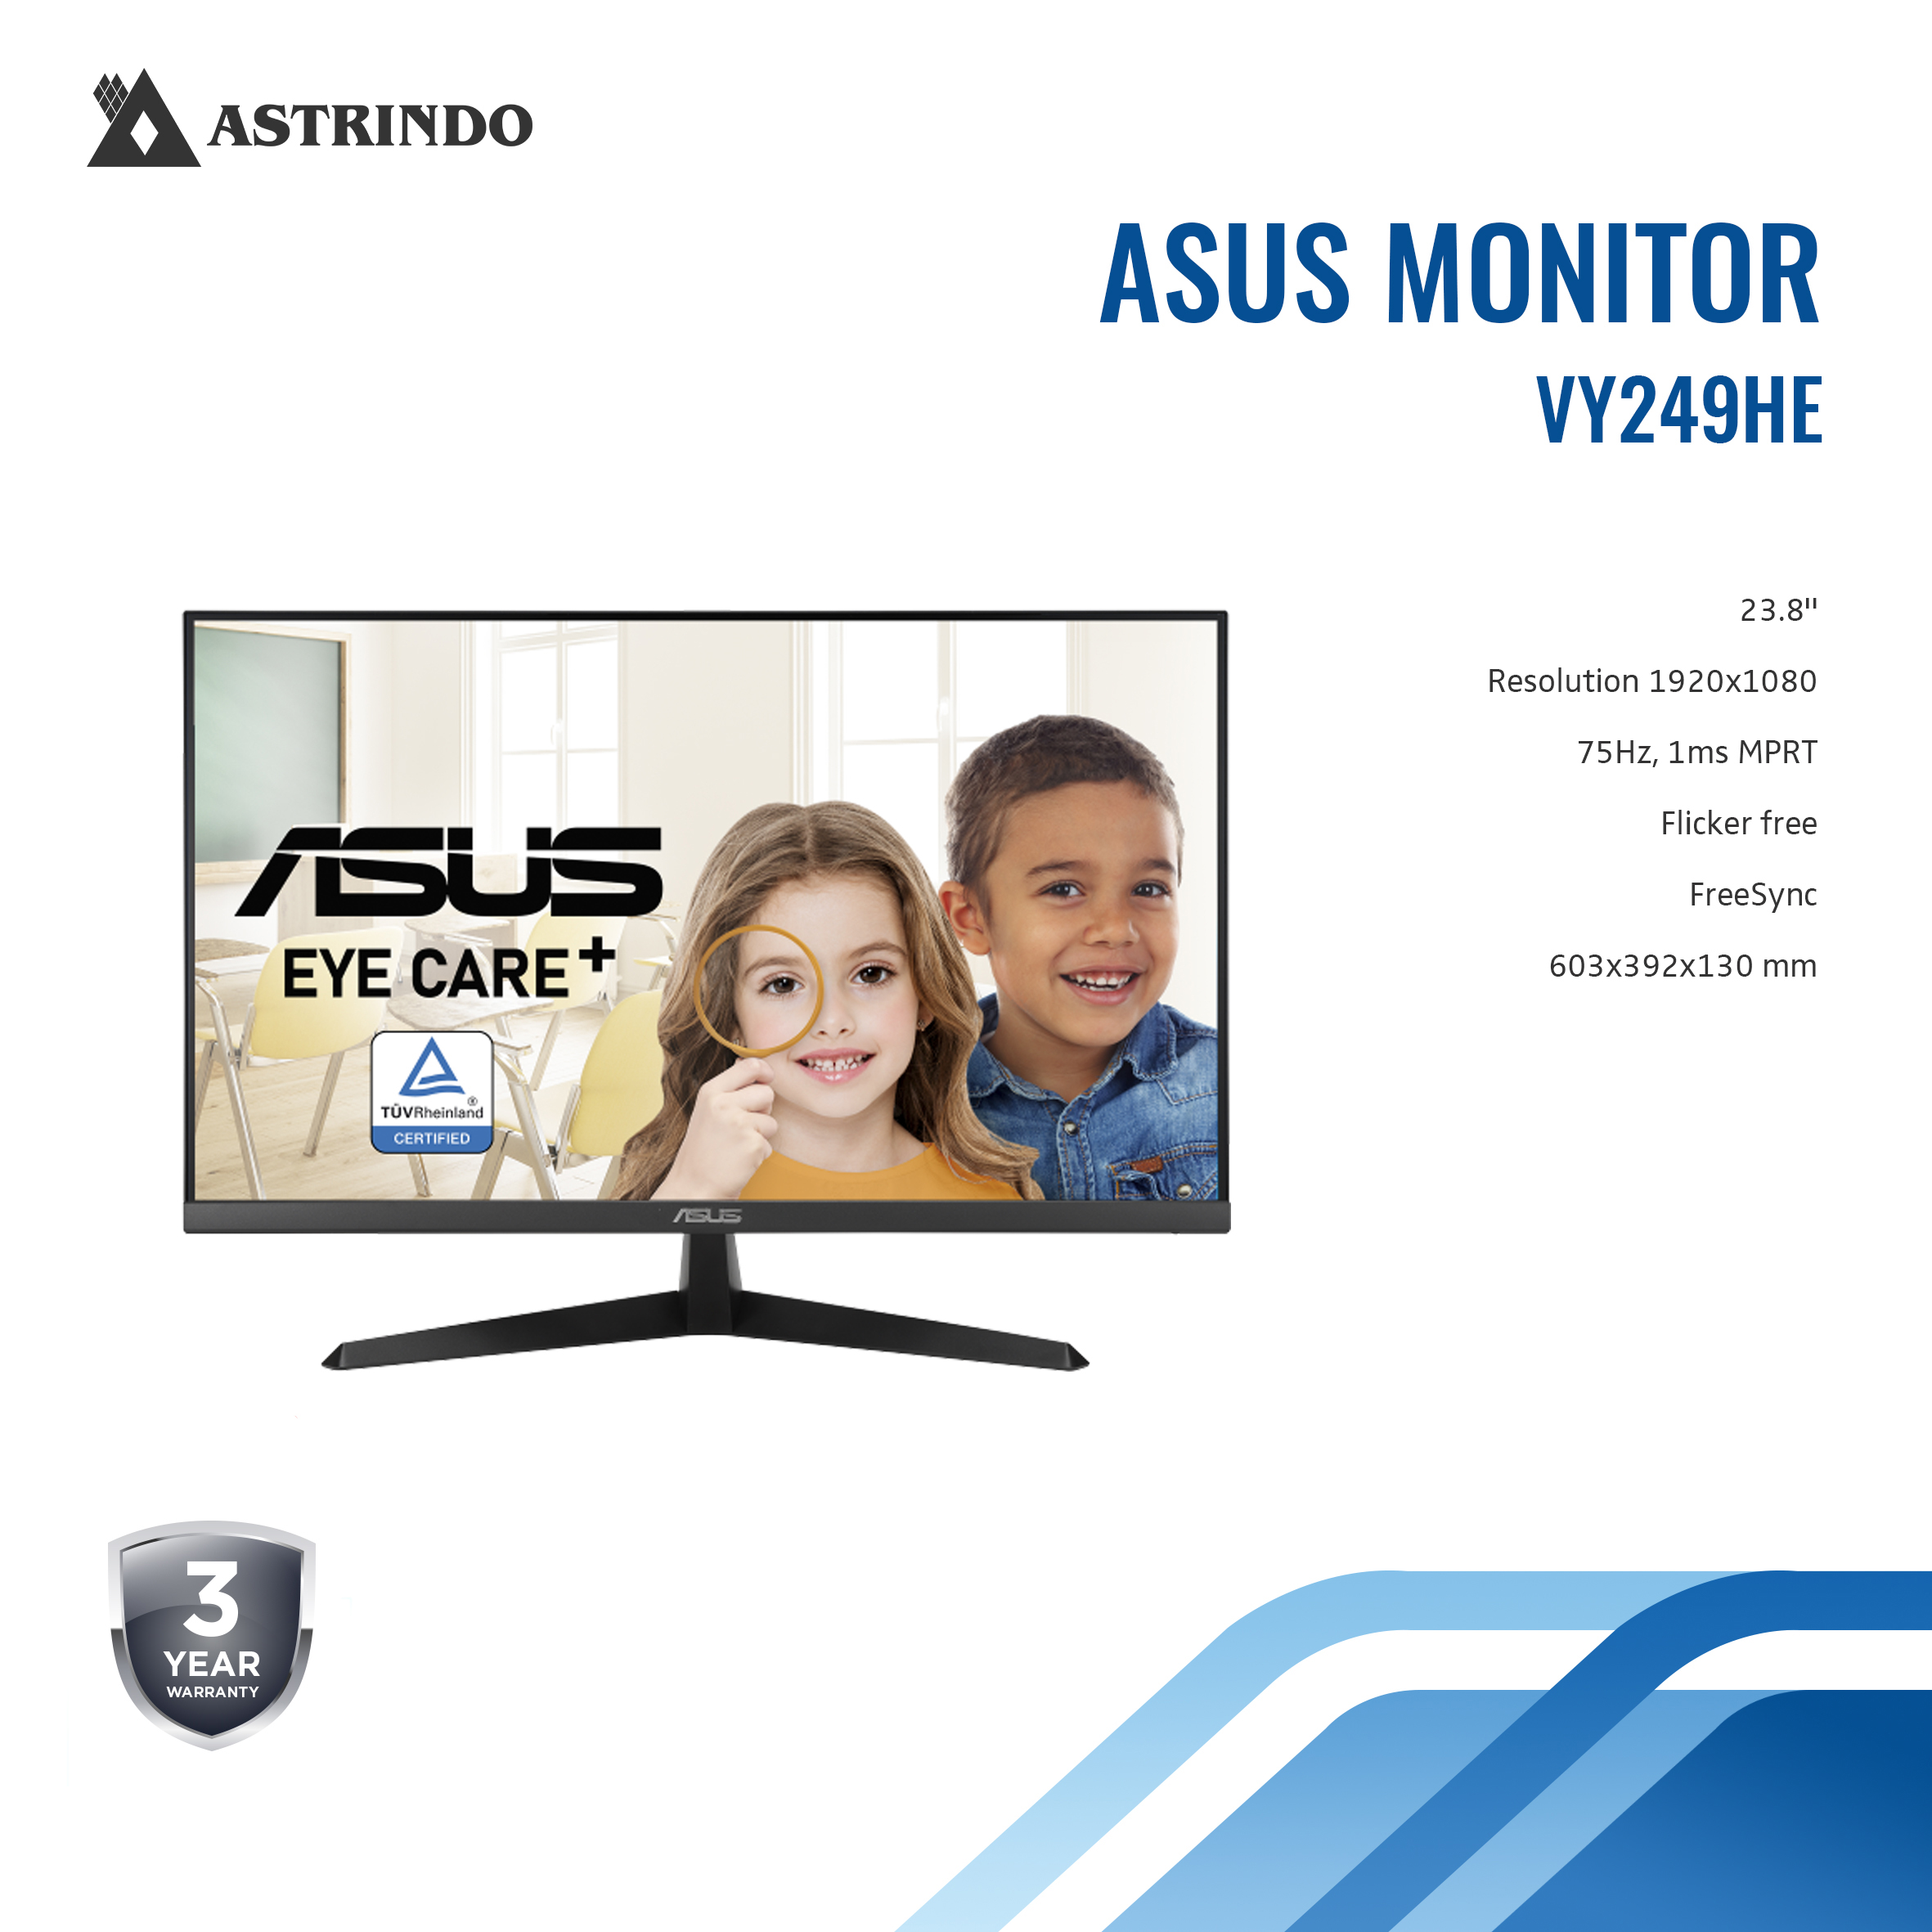 ASUS Asus VY249HE Eye Care Monitor 23.8 inch - Astrindostore.com